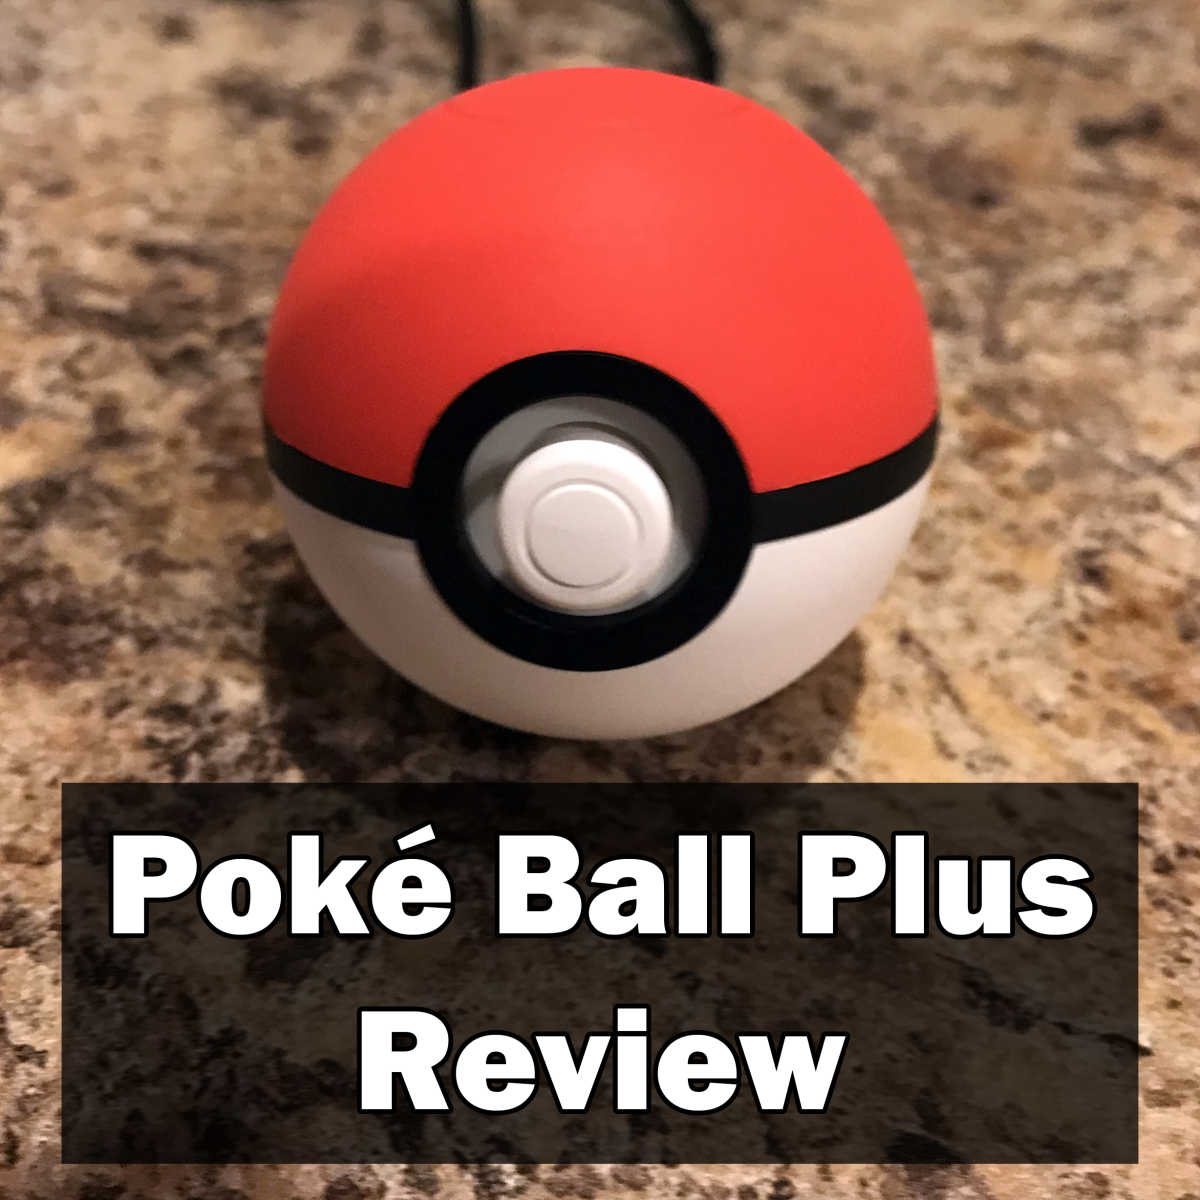 The Poké Ball Plus adds an extra element to the "Pokémon: Let's Go" games and makes them more fun and immersive.